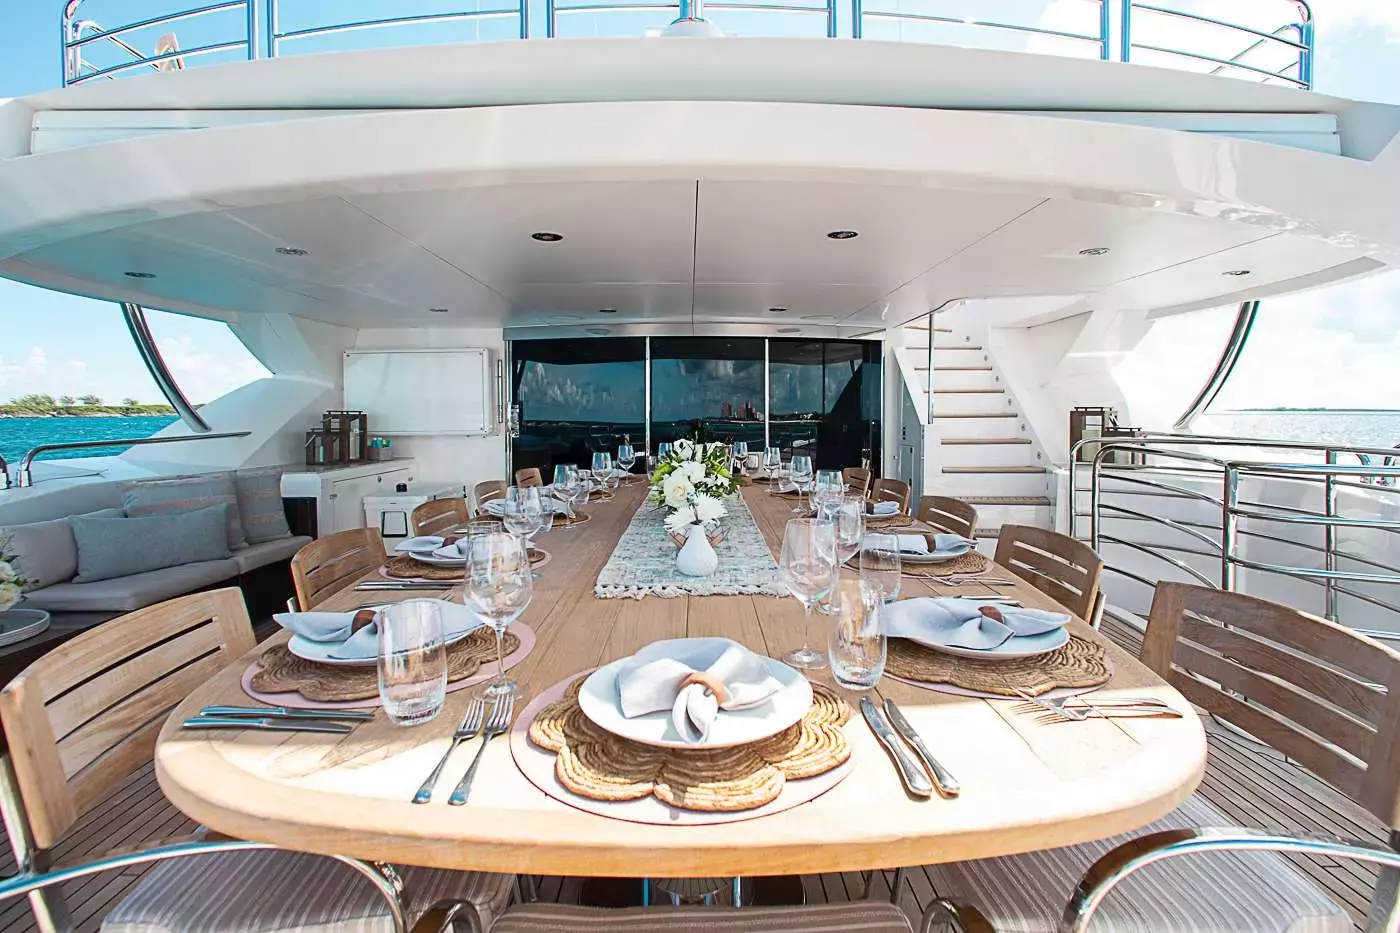 Acacia by Sunseeker - Top rates for a Charter of a private Superyacht in St Barths